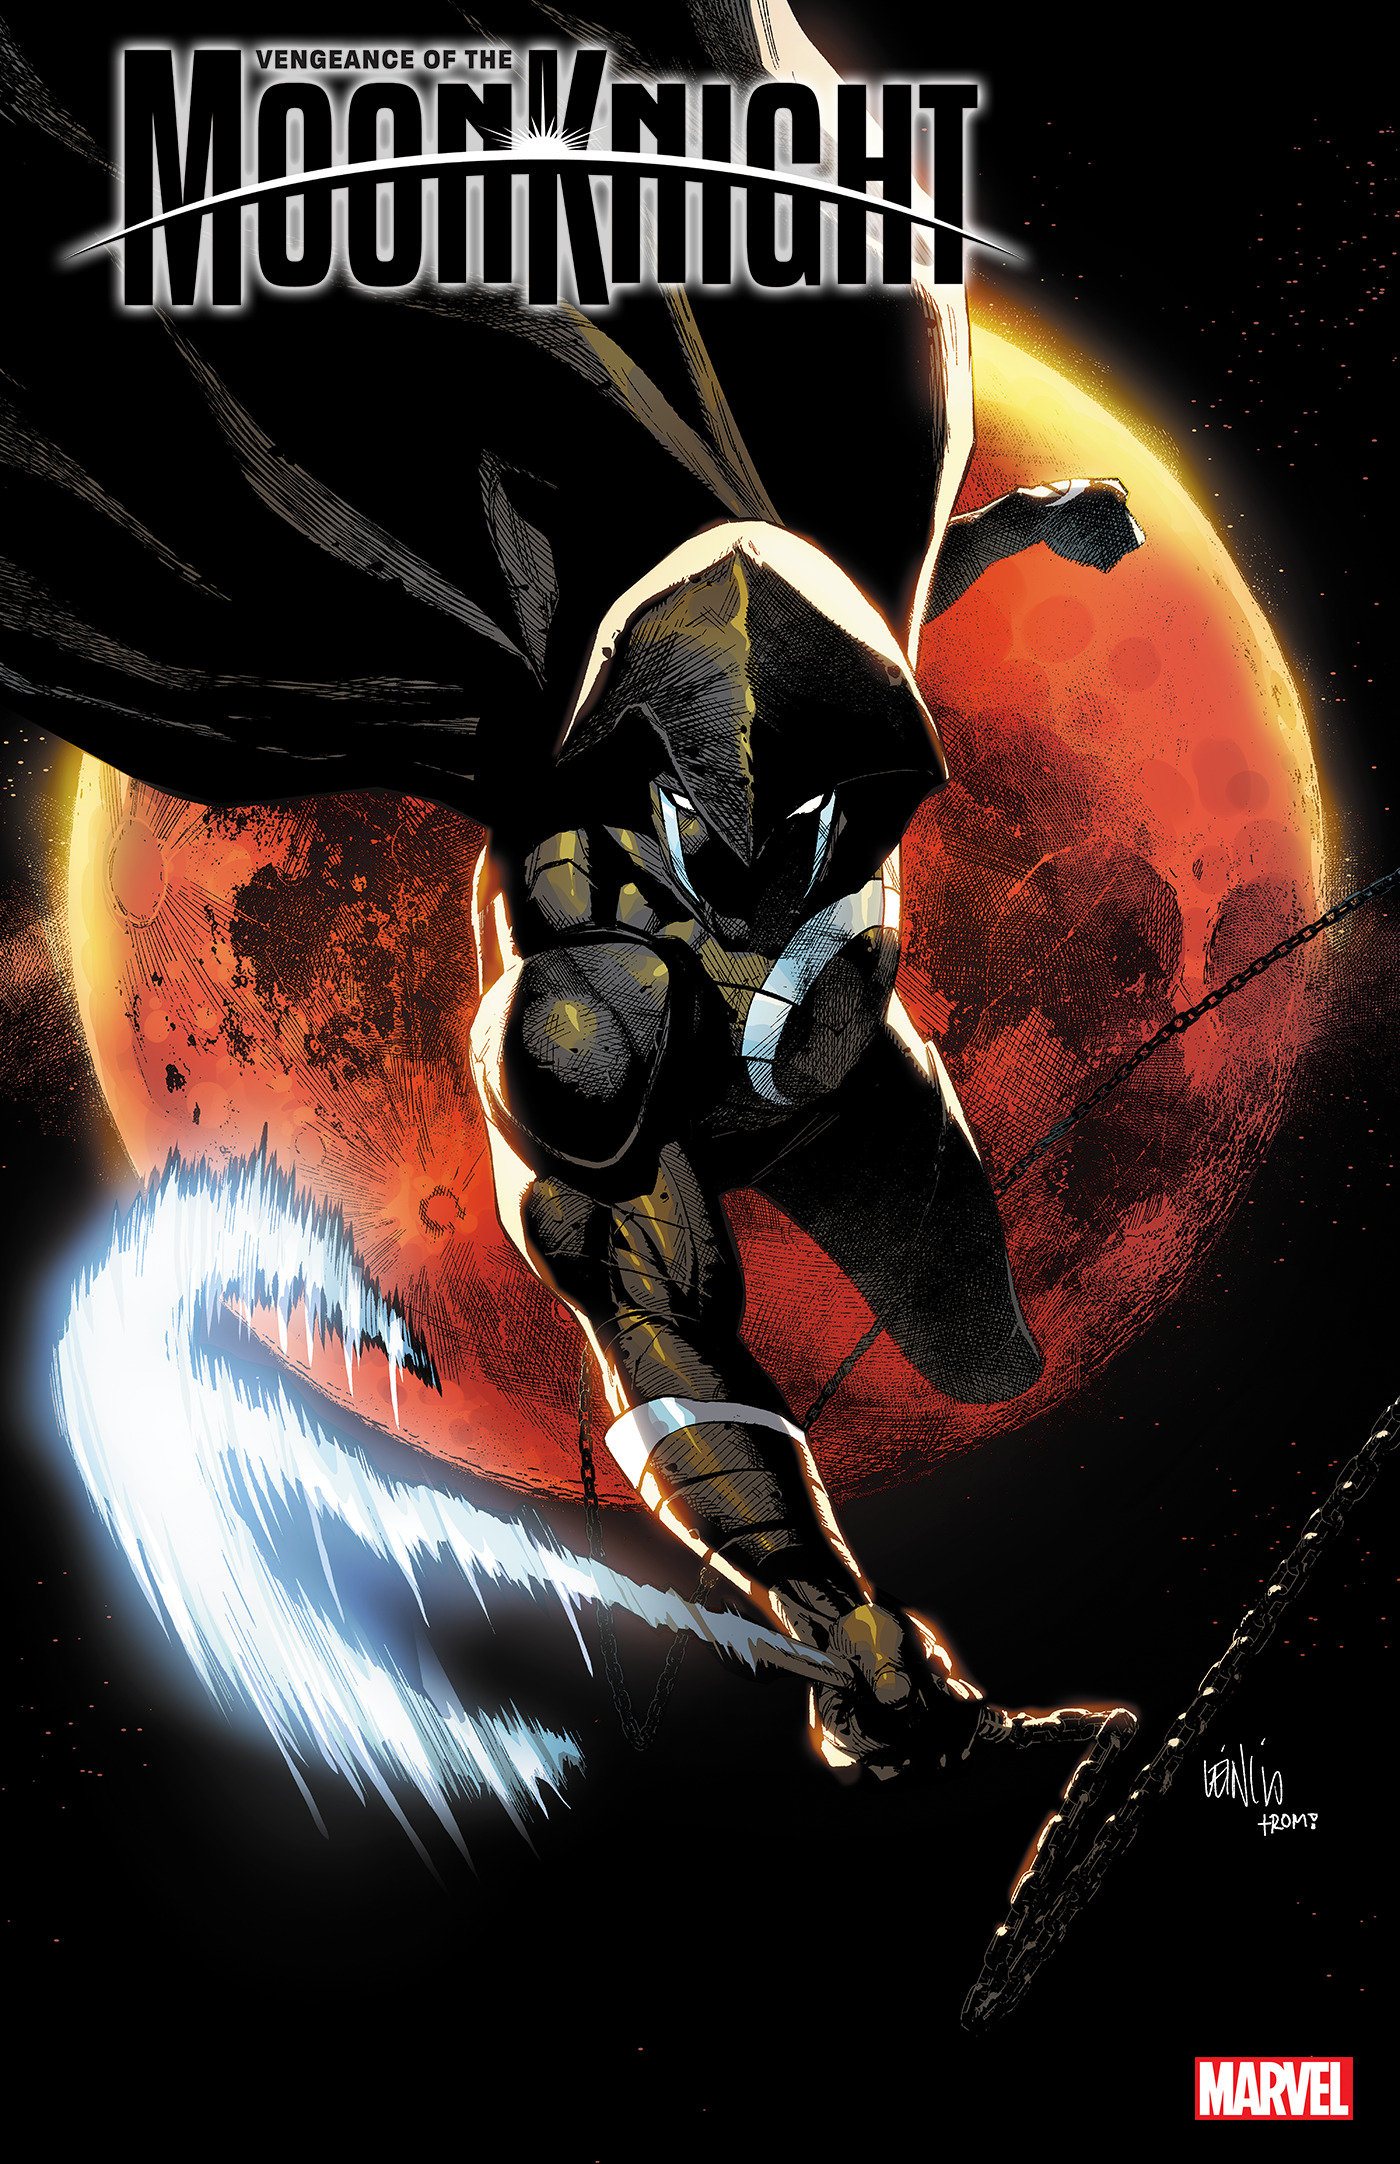 Vengeance of the Moon Knight #1 Leinil Yu Variant 1 for 25 Incentive